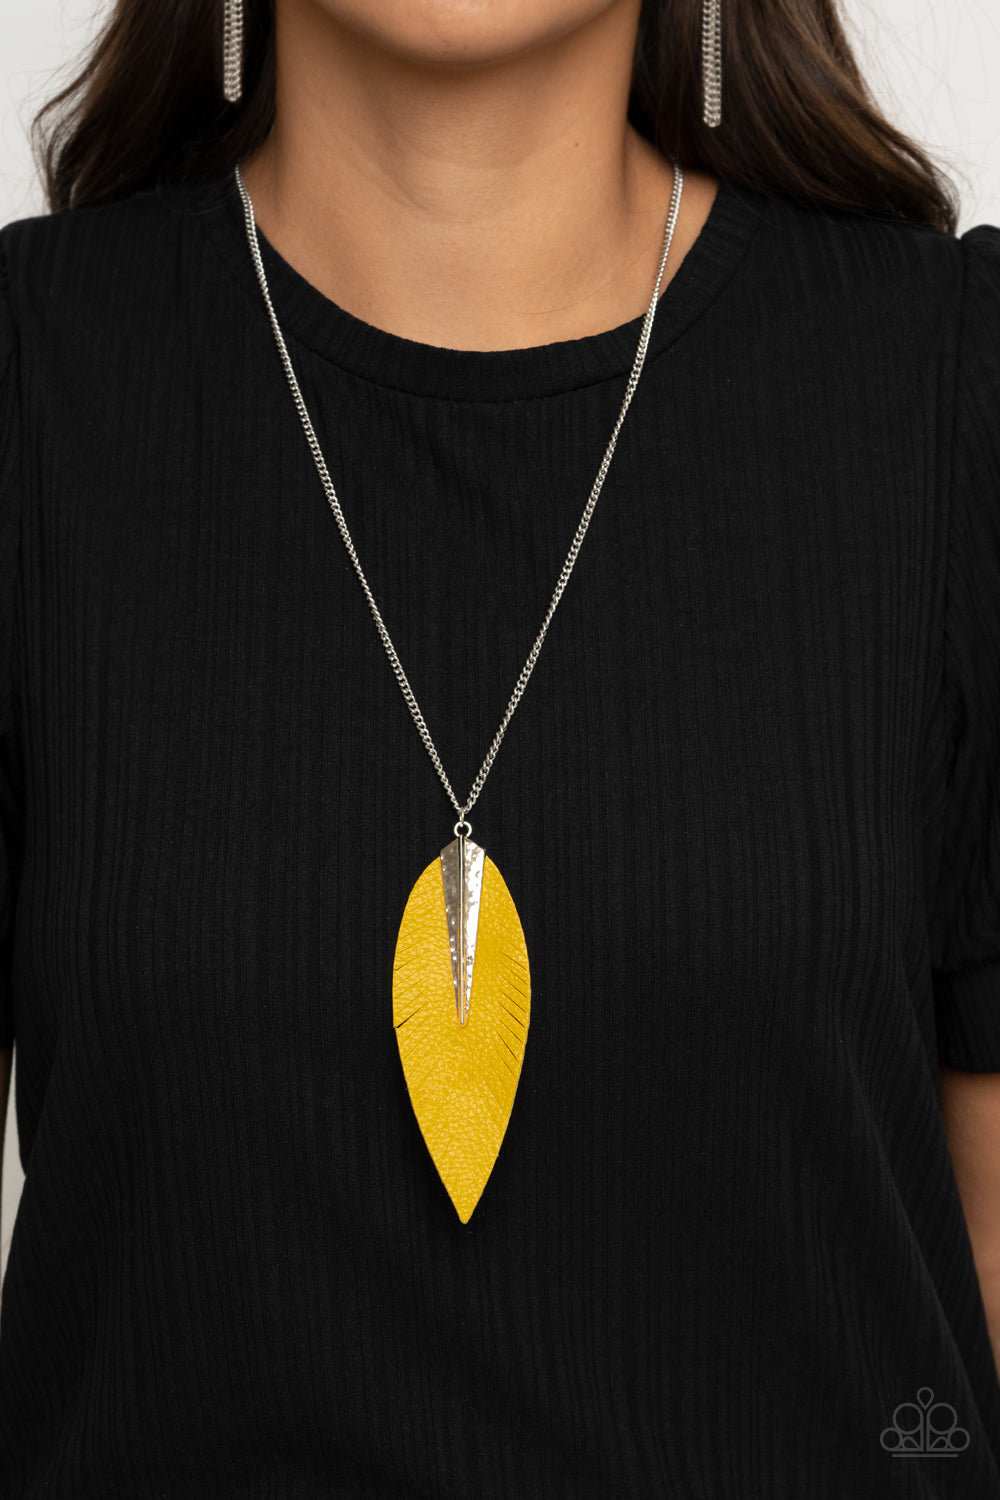 Paparazzi Accessories - Quill Quest #N461 - Yellow Necklace